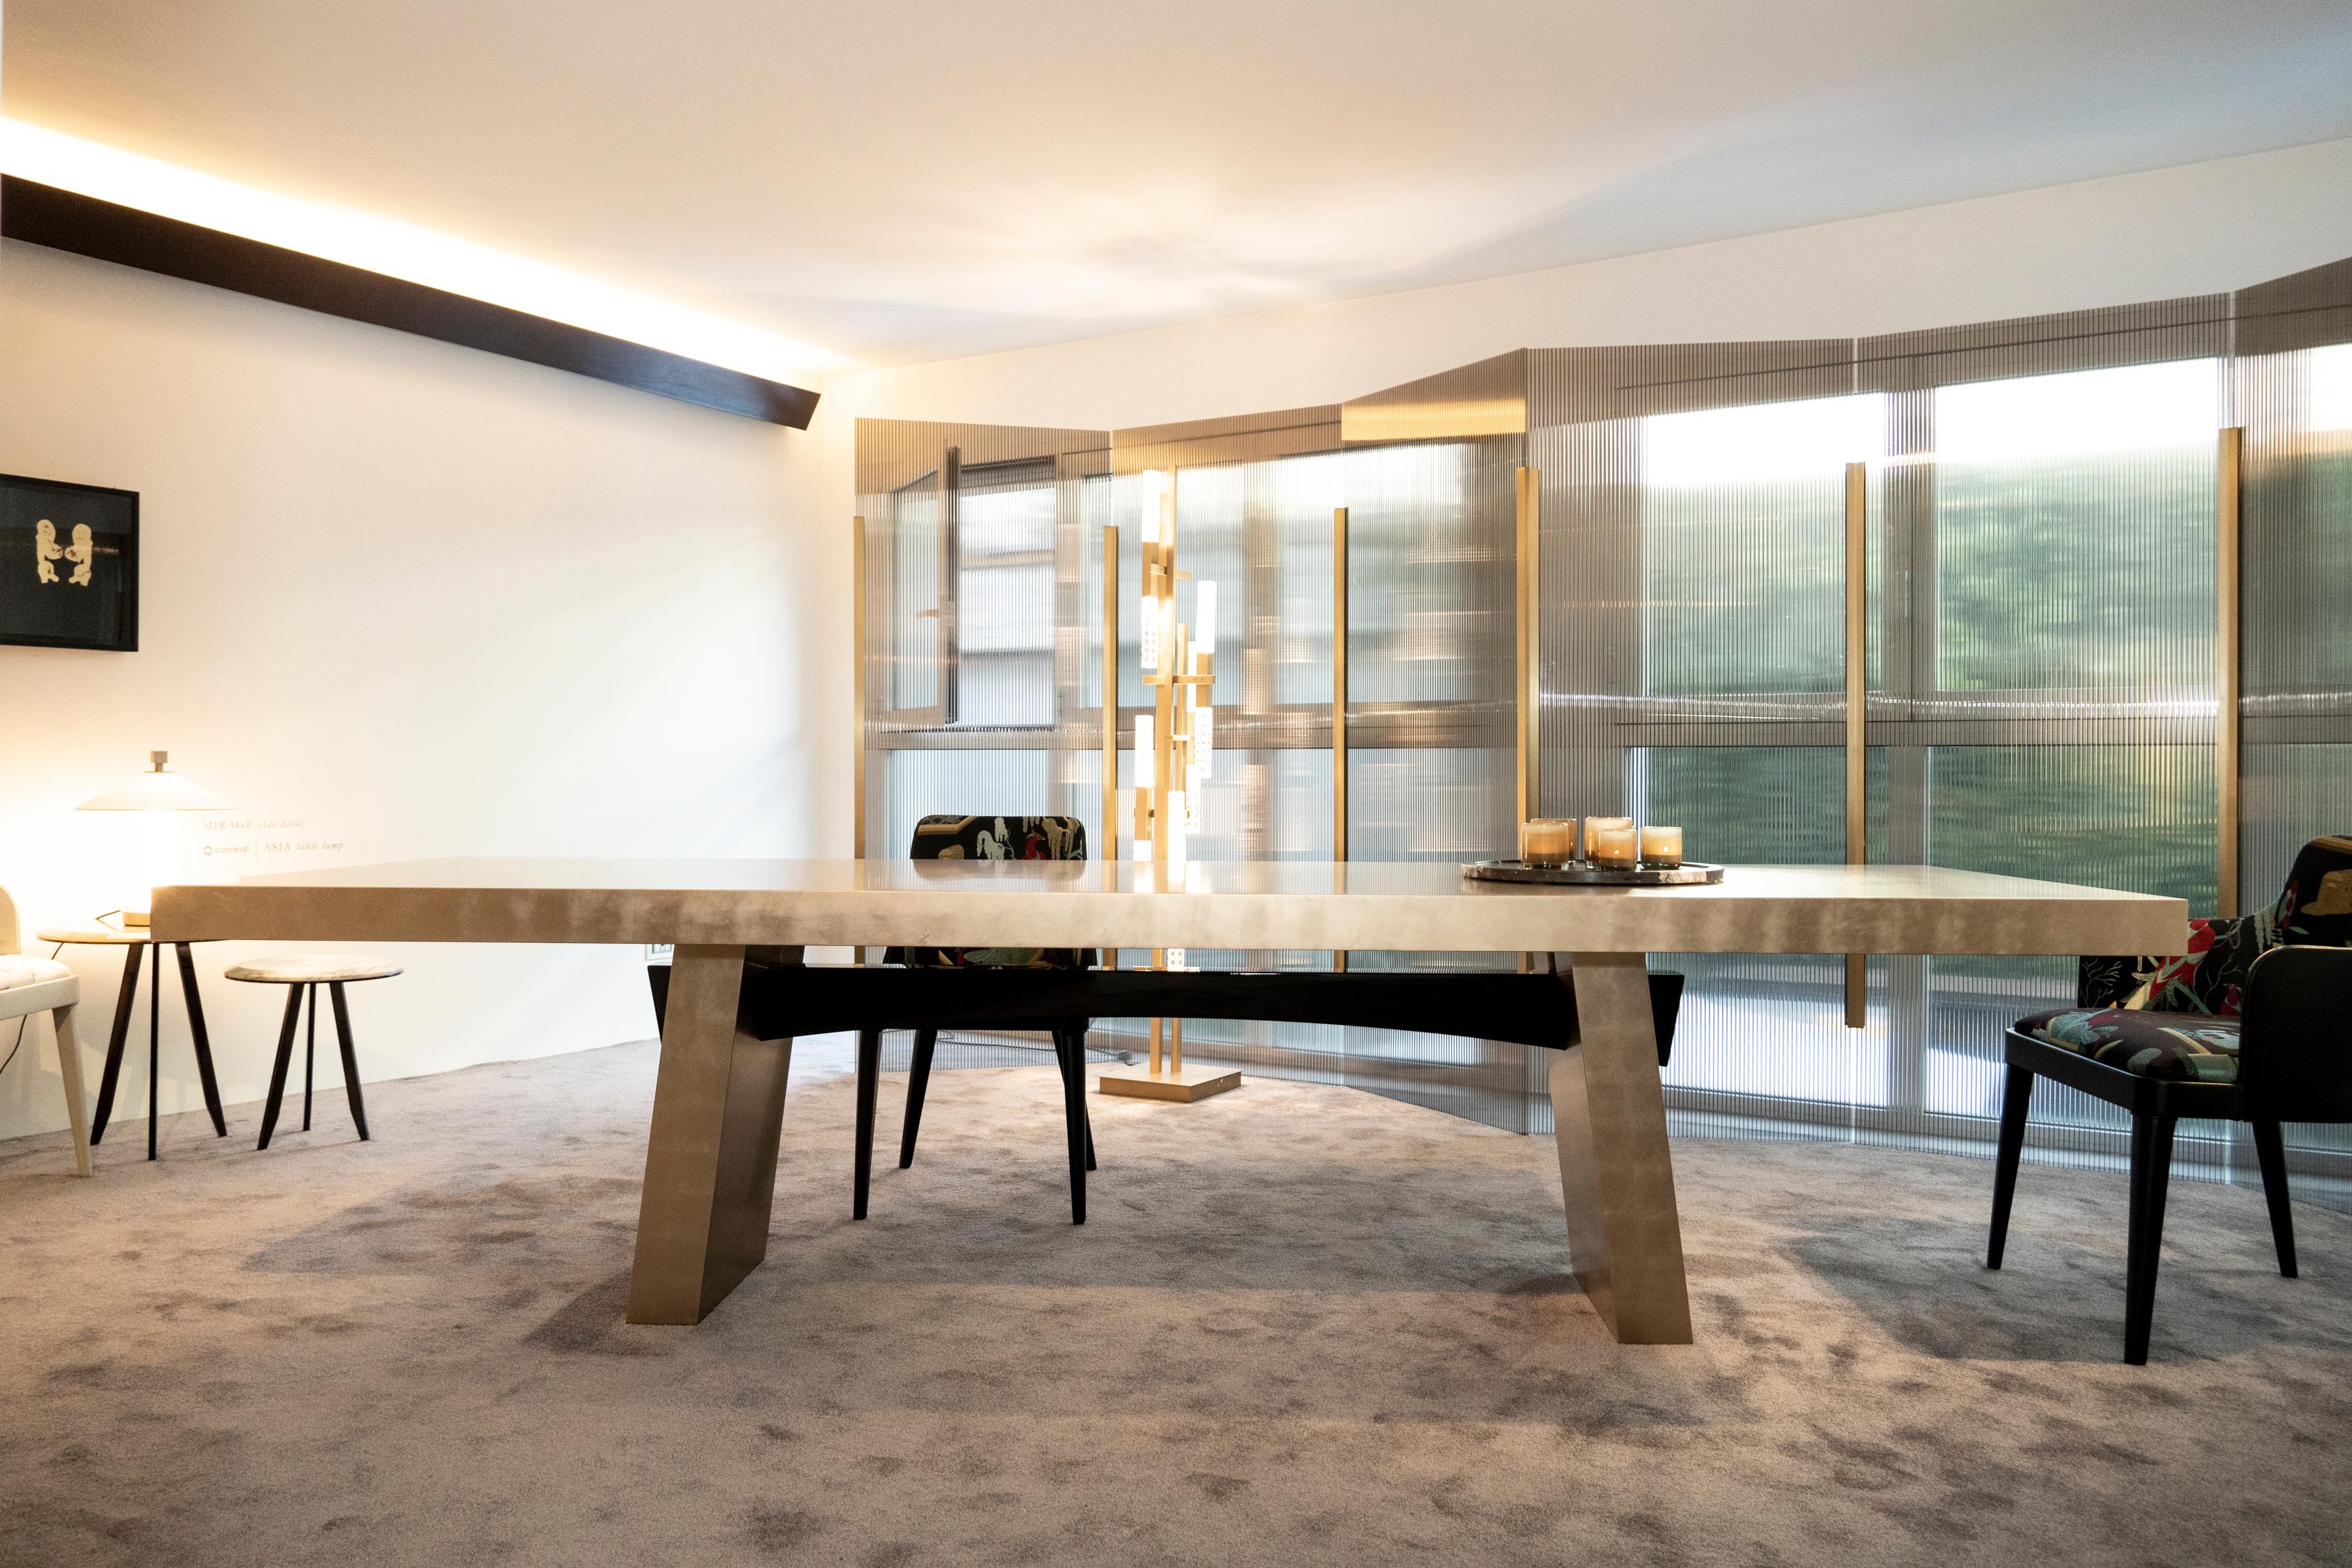 A very elegant table covered in 22-karat pure gold leaf. Luxury and essentiality. Ostentation and concreteness. Provocation and game. The WA table, renamed Midas with this new livery, does not forget the balance of proportions typical of the